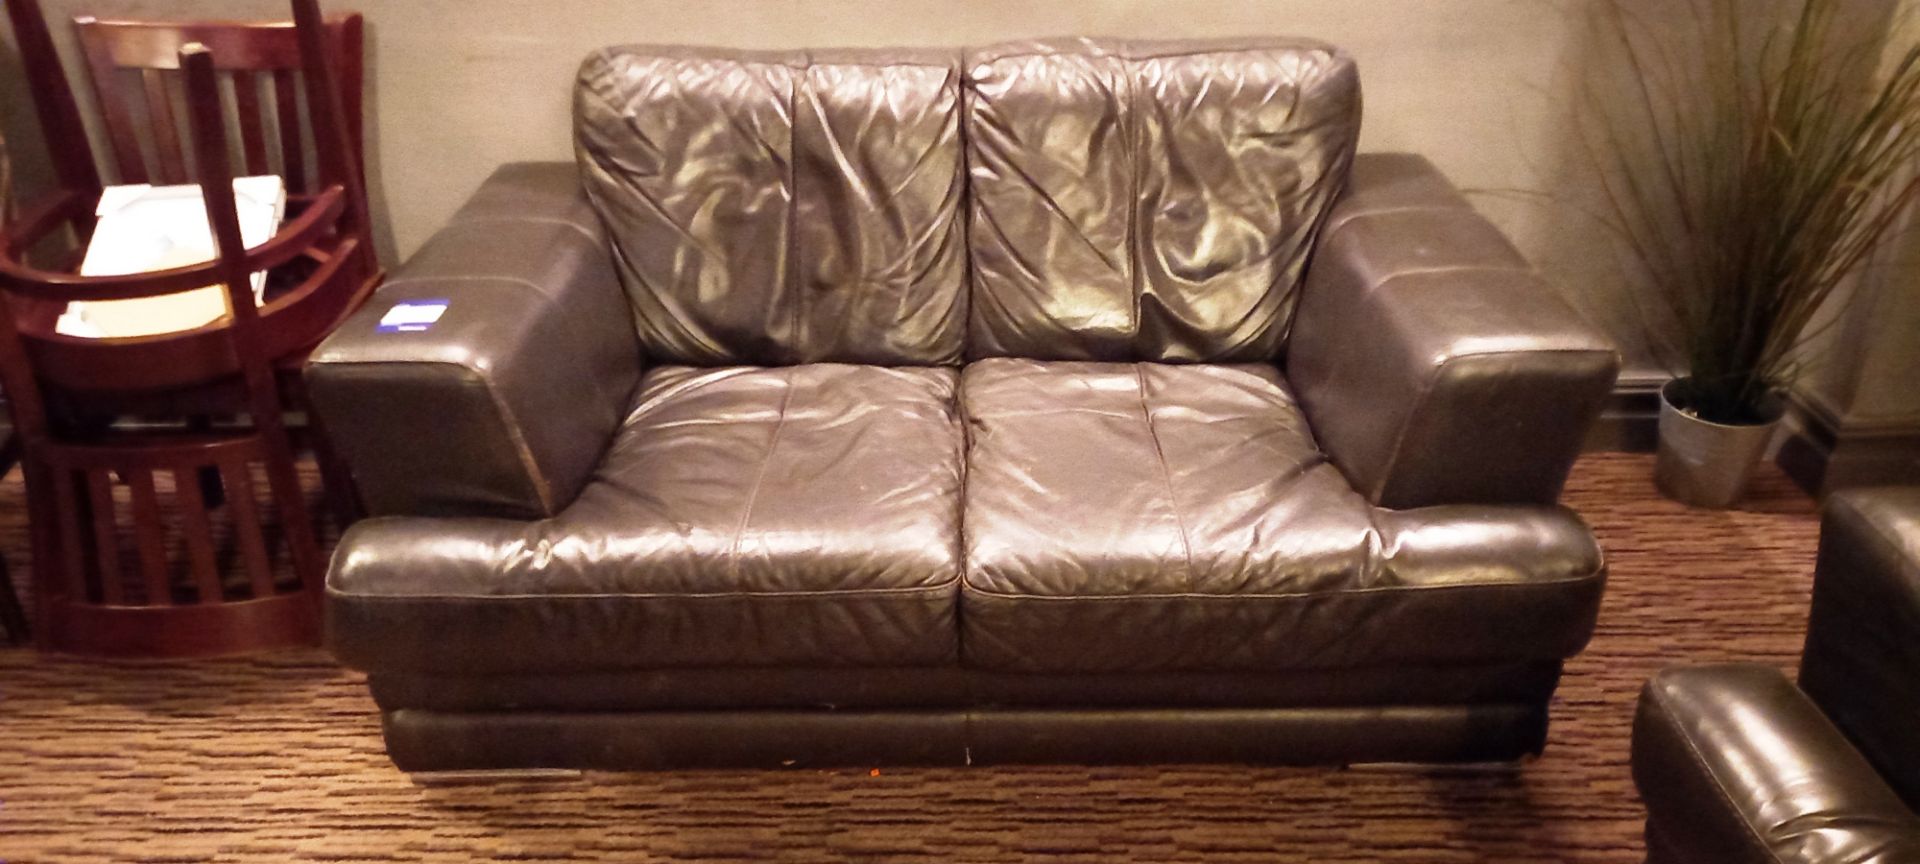 Two Piece Leather Sofa & Armchair Set - Image 2 of 3